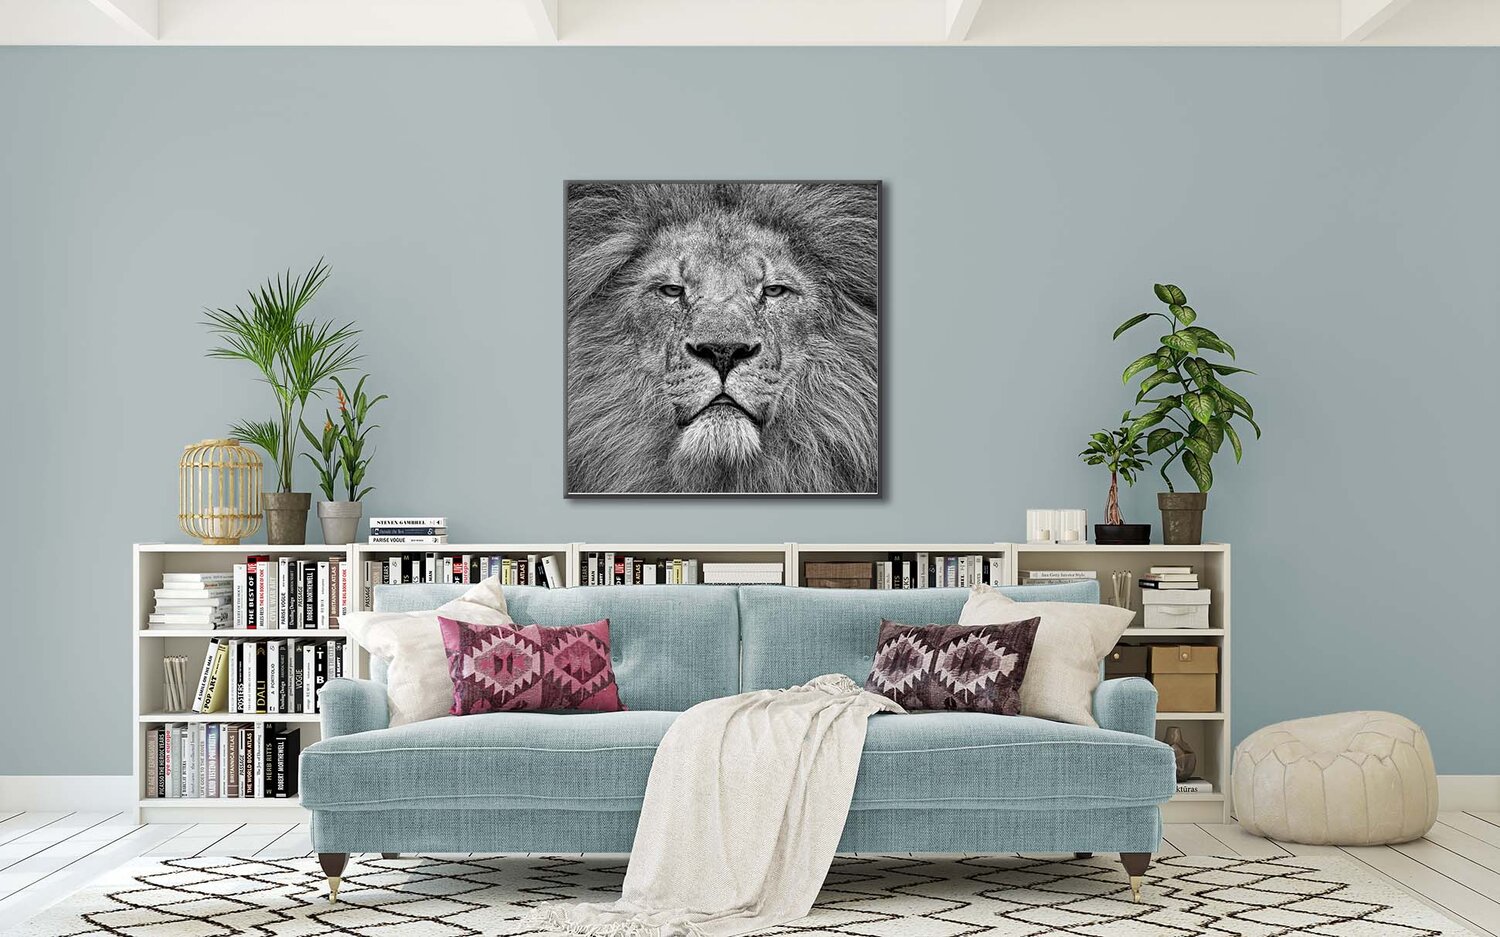 Paul Coghlin — Fearless (Portrait of an African Lion). Limited edition ...